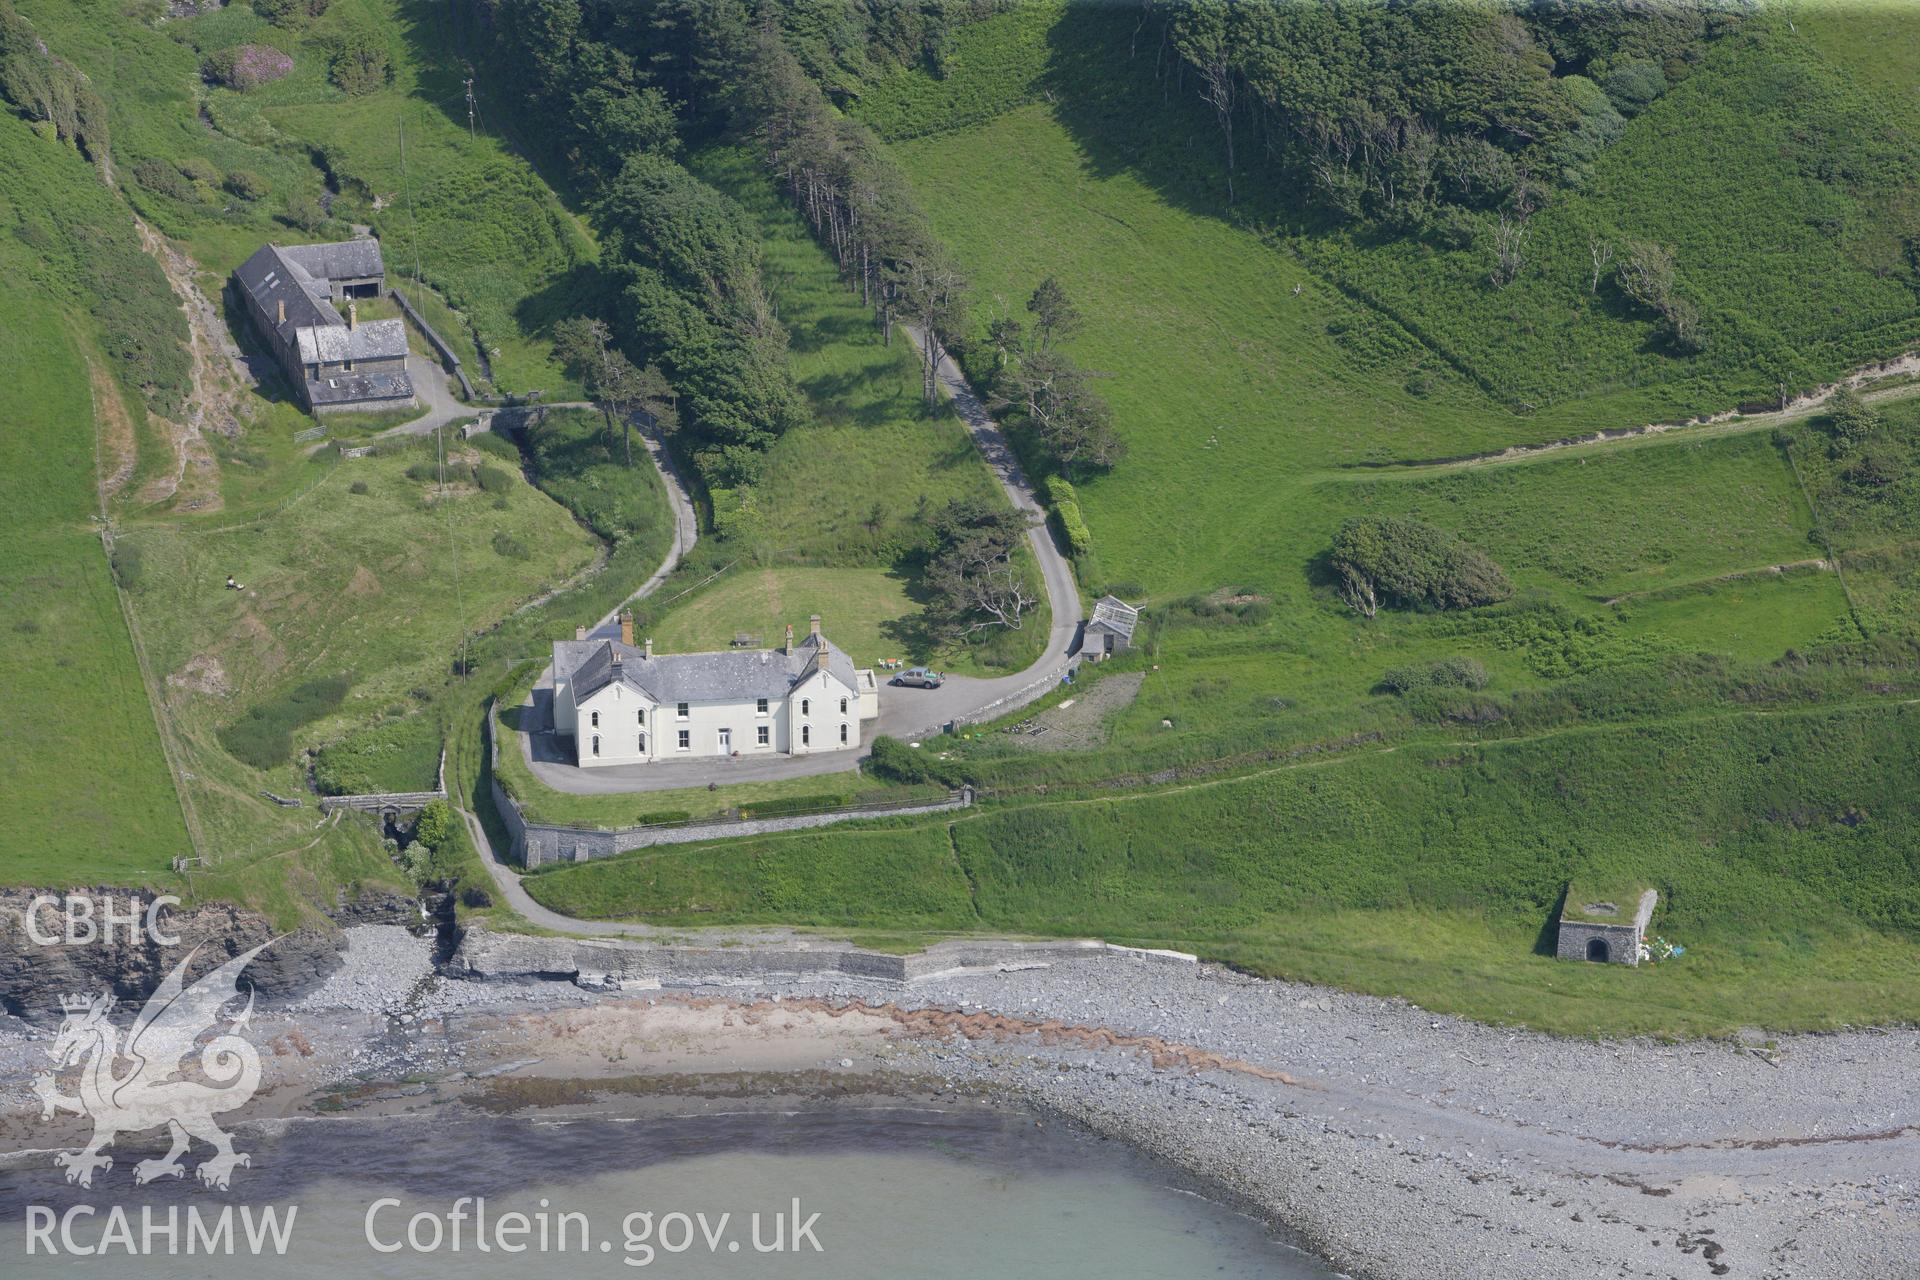 RCAHMW colour oblique aerial photograph of Wallog Limekiln. Taken on 16 June 2009 by Toby Driver